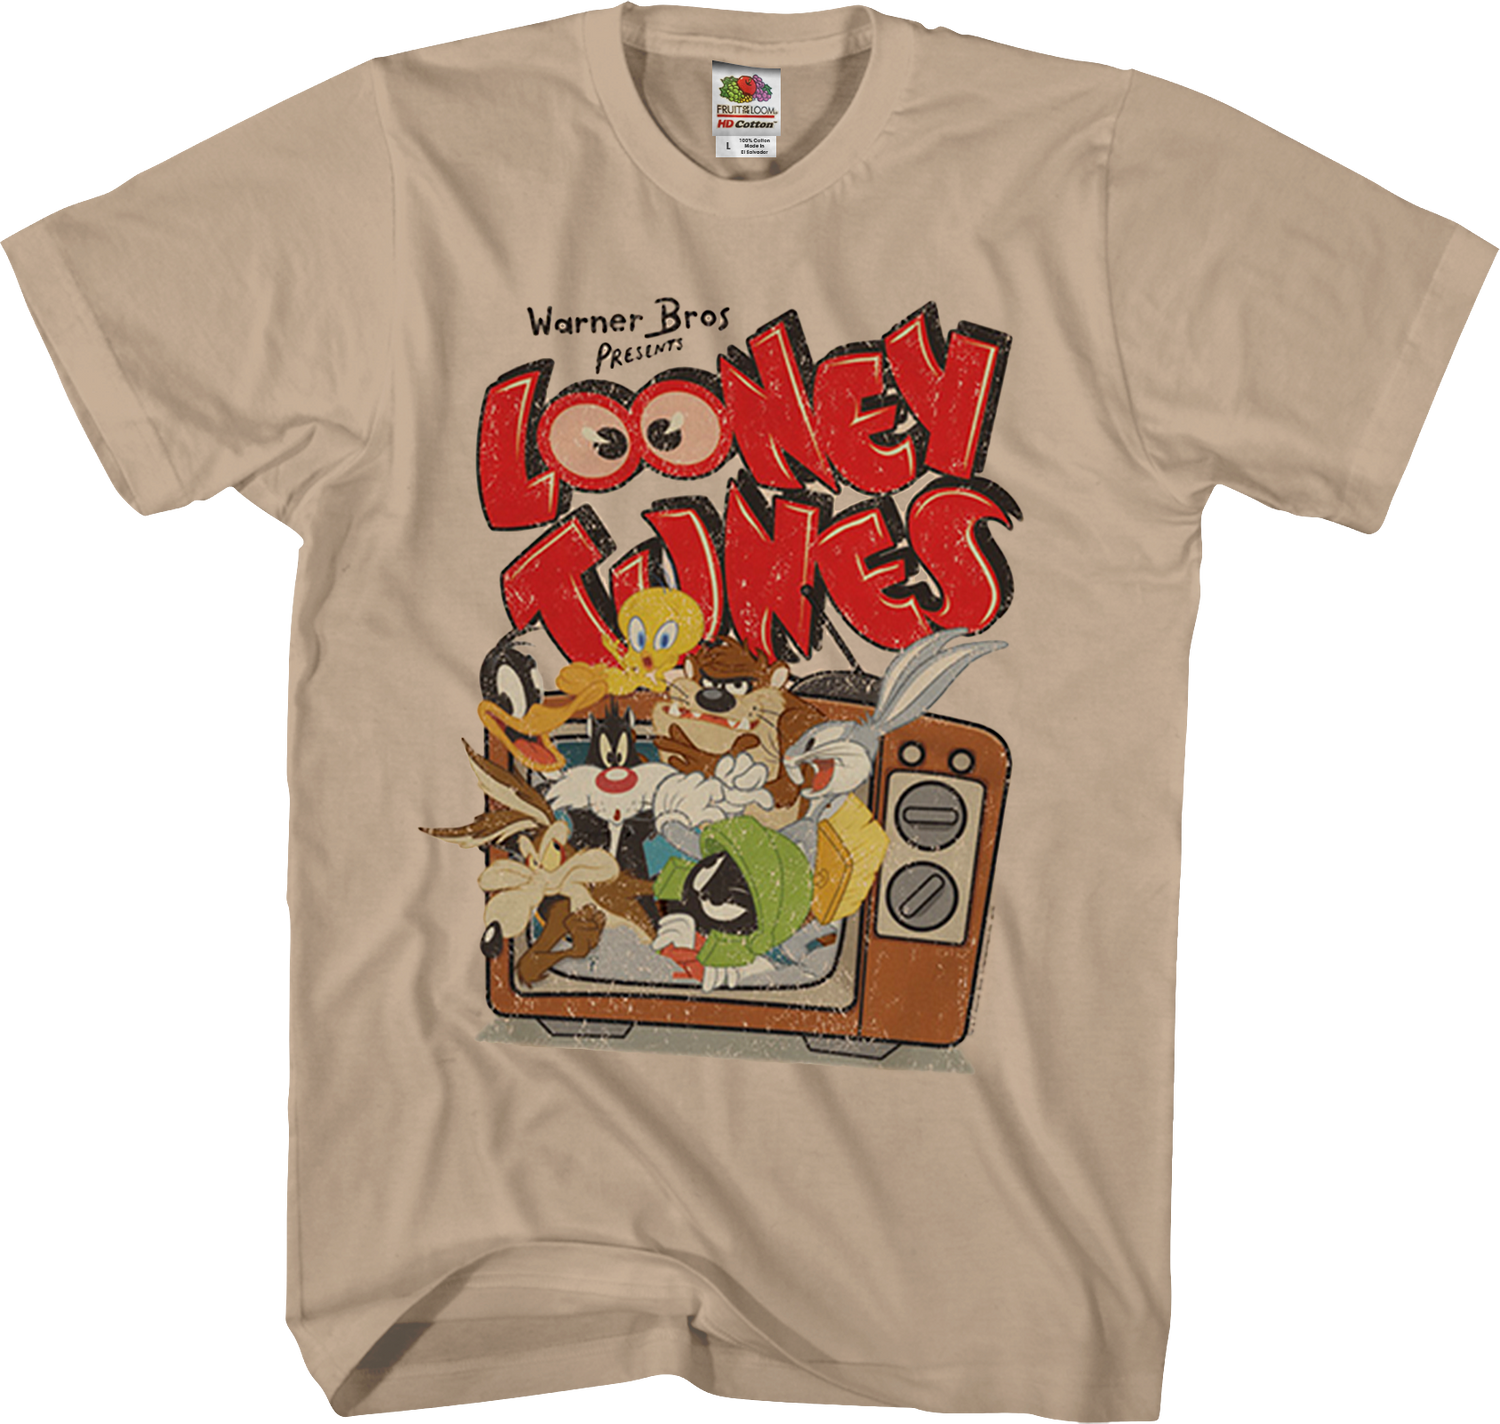 Looney Tunes Shirt: Officially Licensed Looney Tunes Mens T-Shirt